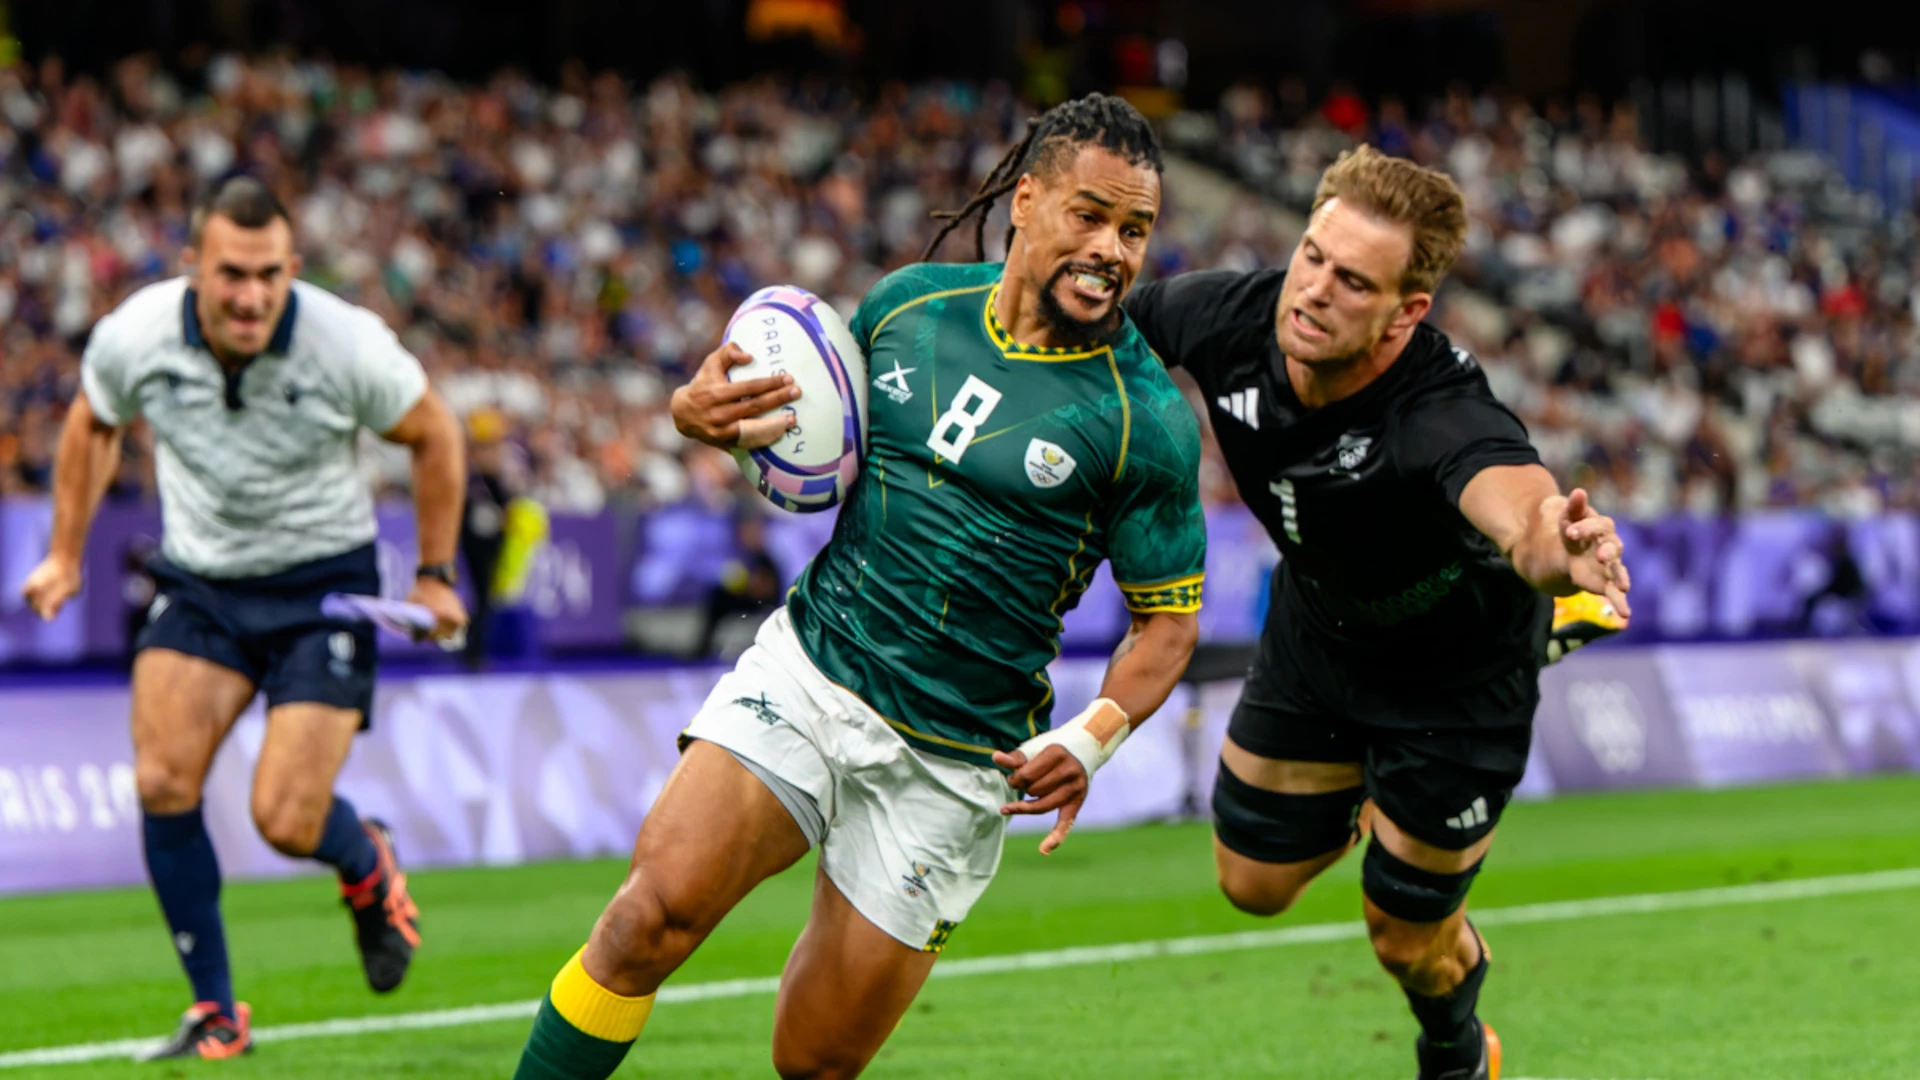 Blitzboks need loads of luck to stay in Olympics after two losses